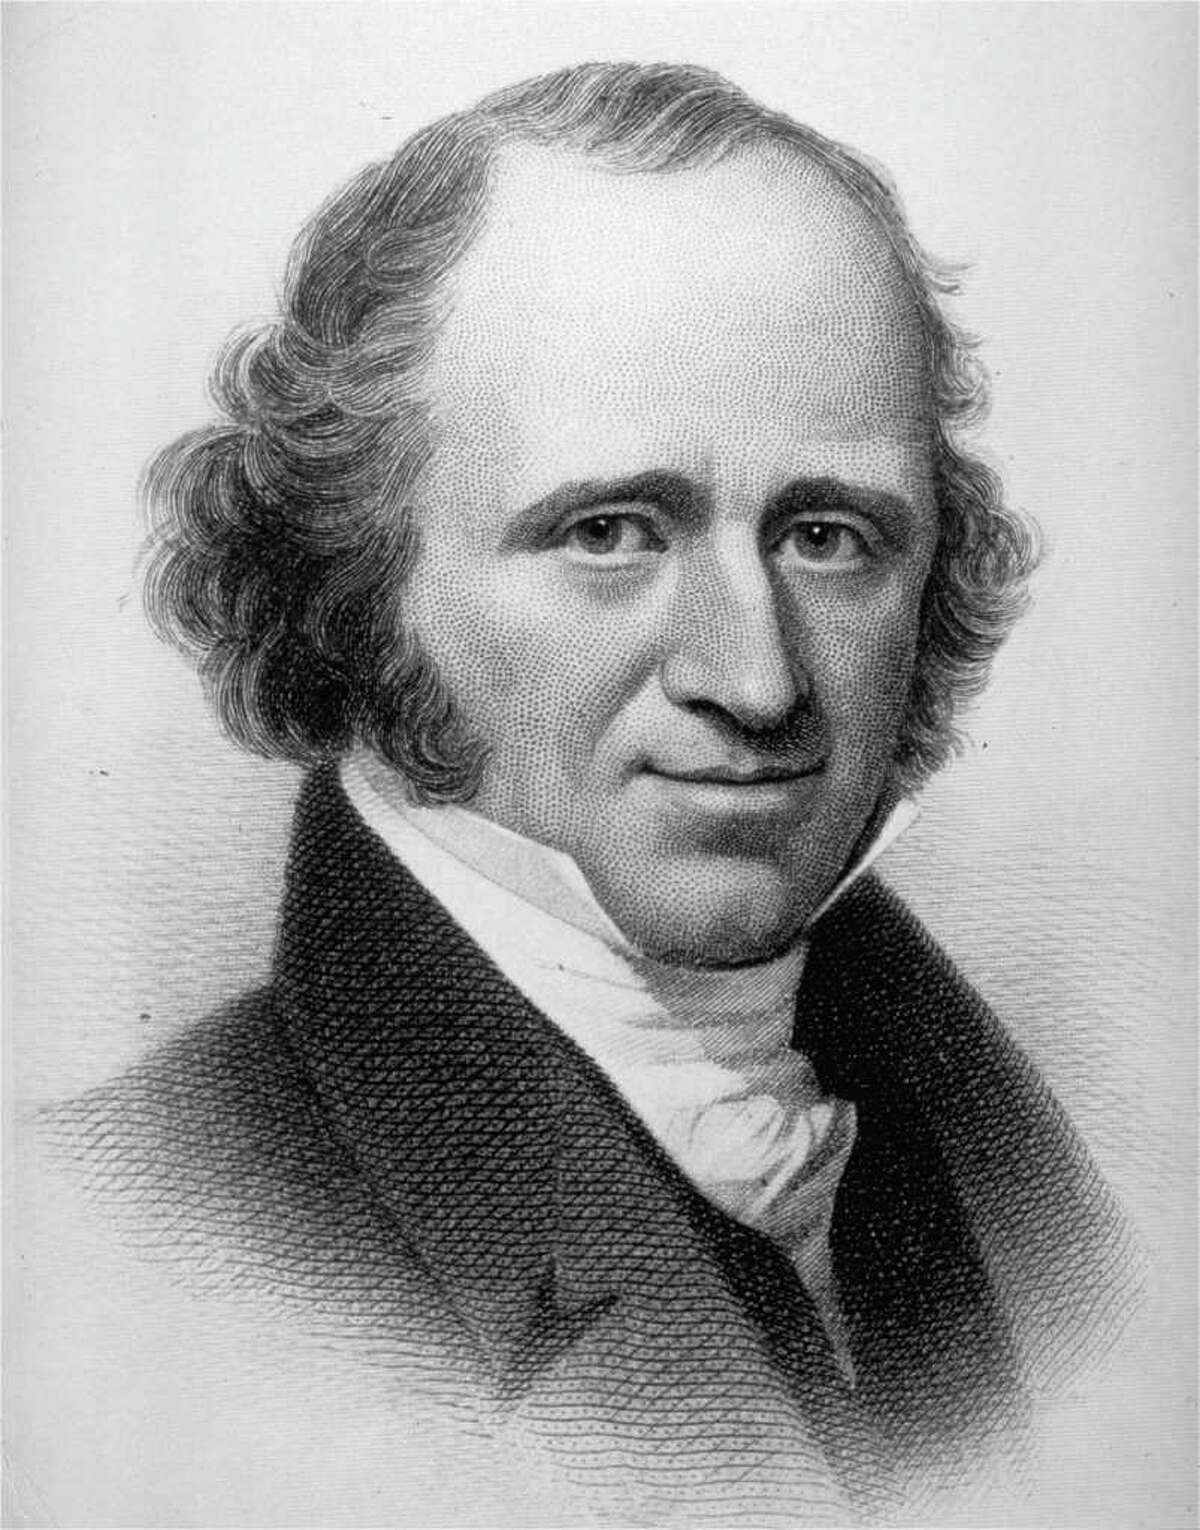 6. Martin Van Buren Old Kinderhook actually did live to be old. At 58 when he left office in 1841, he died 21.39 years later.